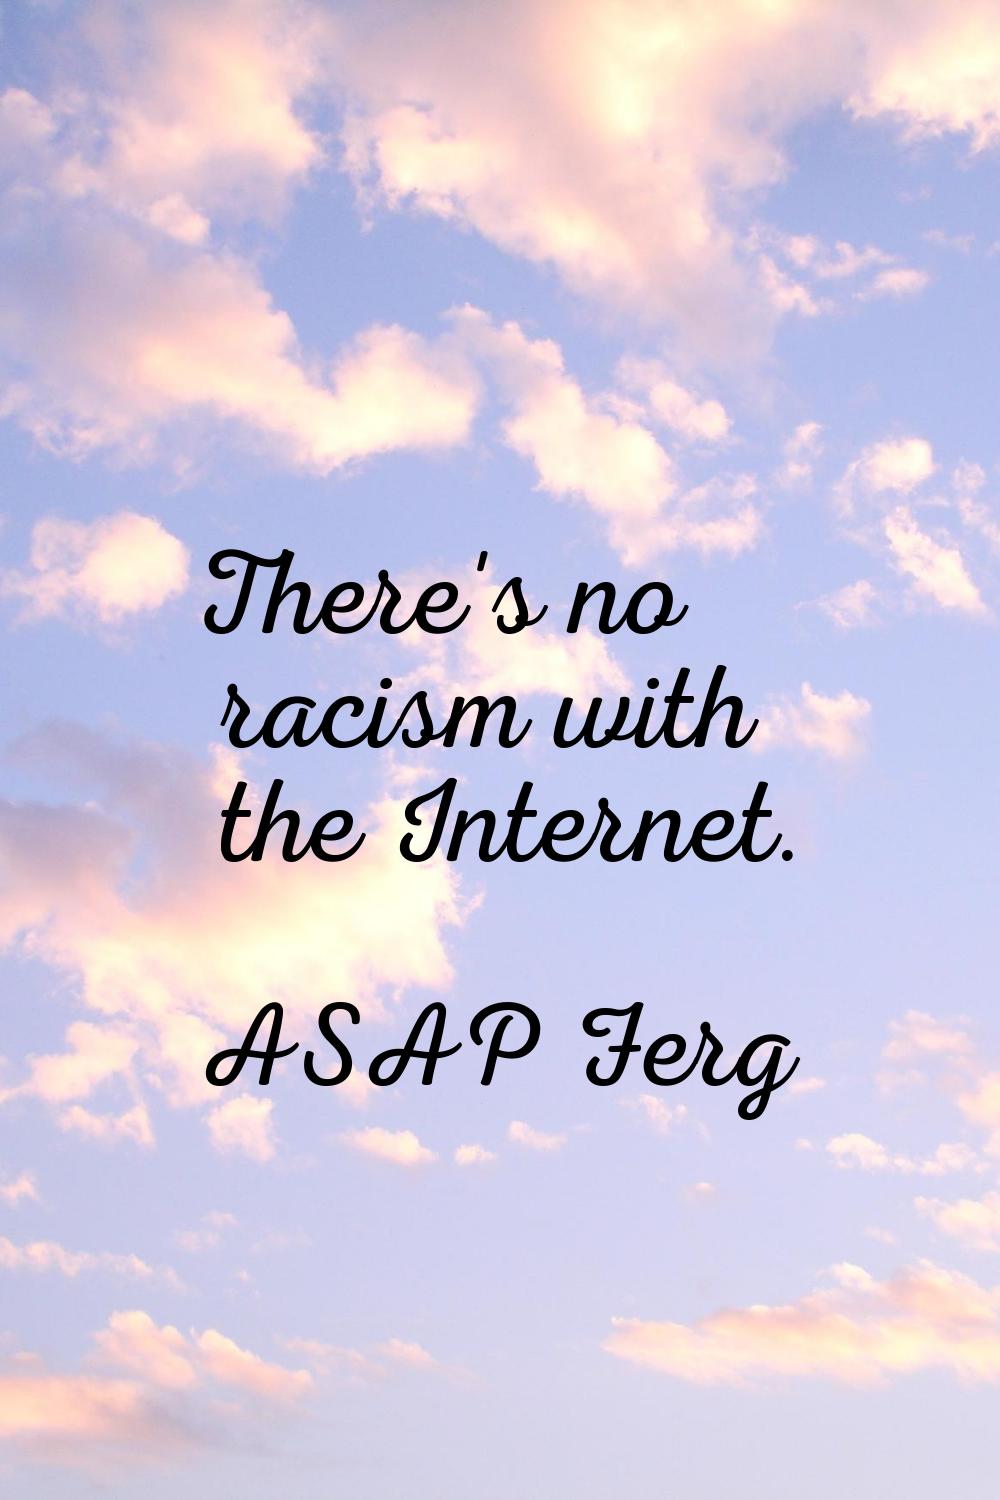 There's no racism with the Internet.